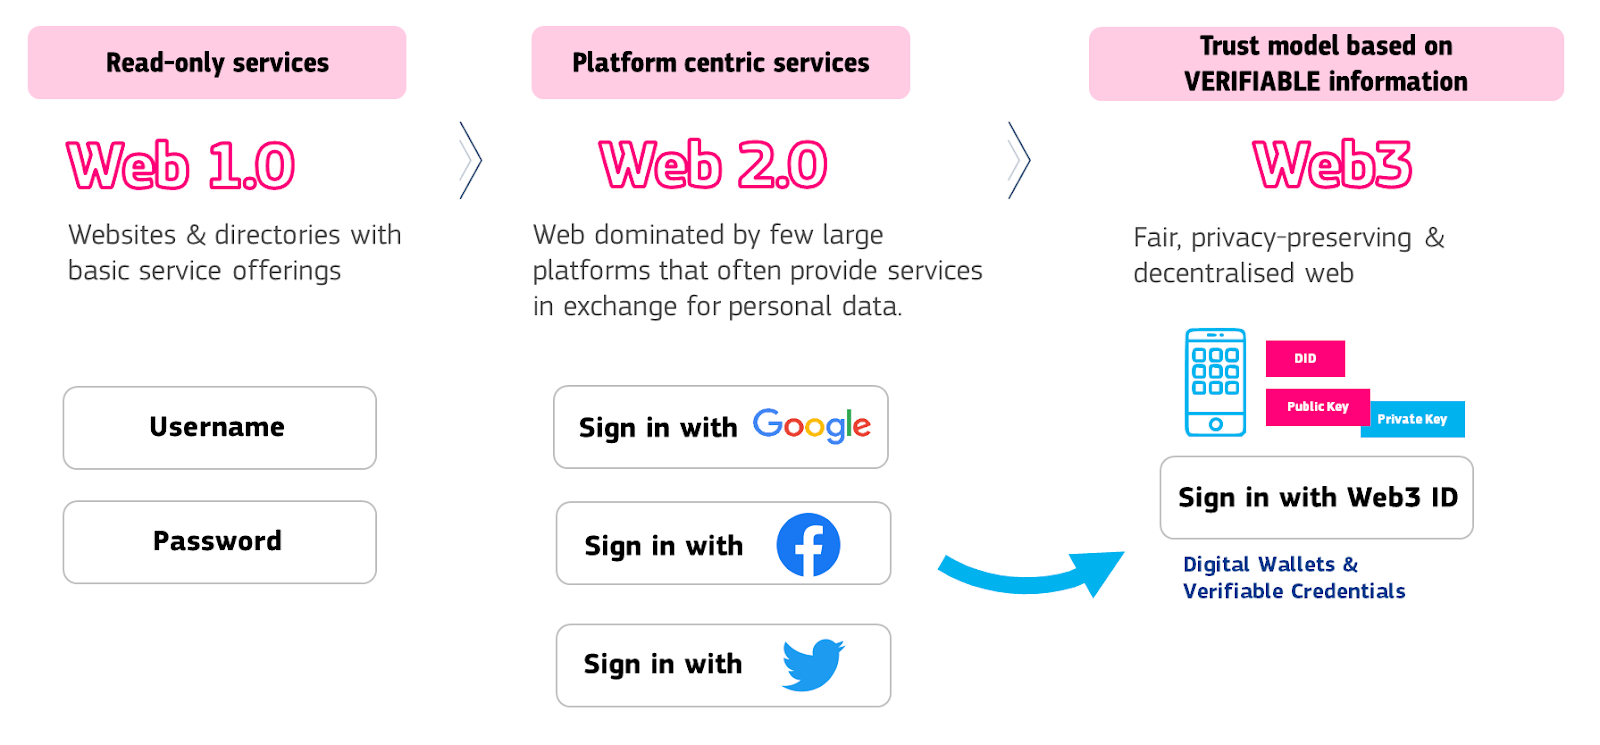 beyond the hype: web3 is in dire need of a rebrand | opinion - 2